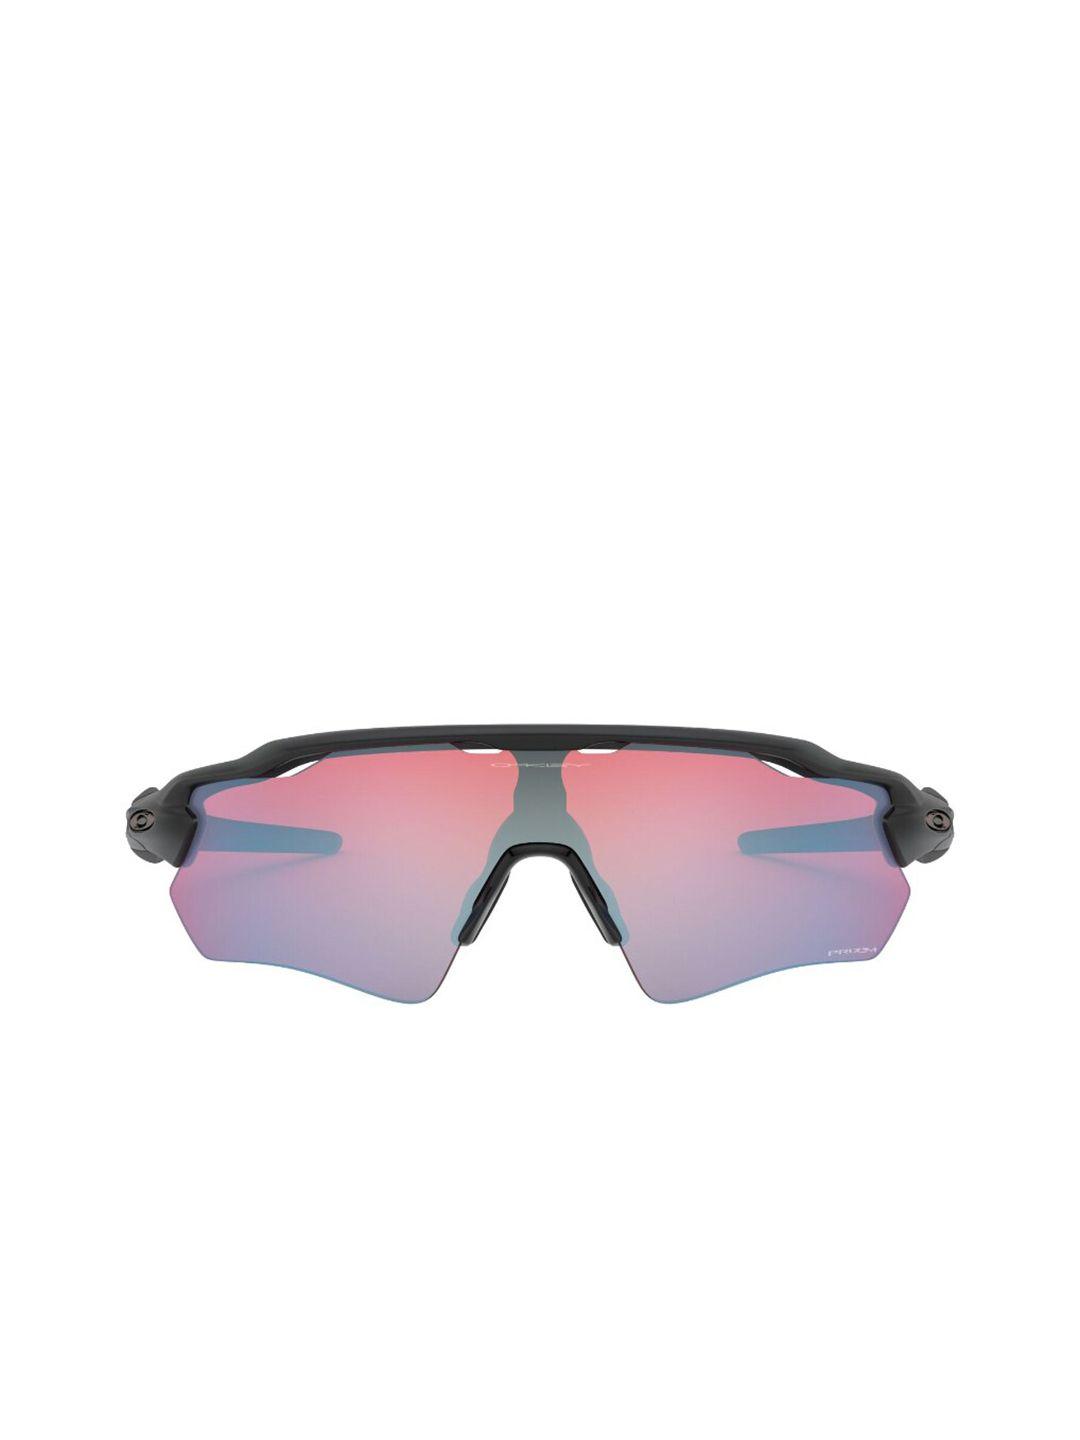 oakley men lens & sports sunglasses with uv protected lens